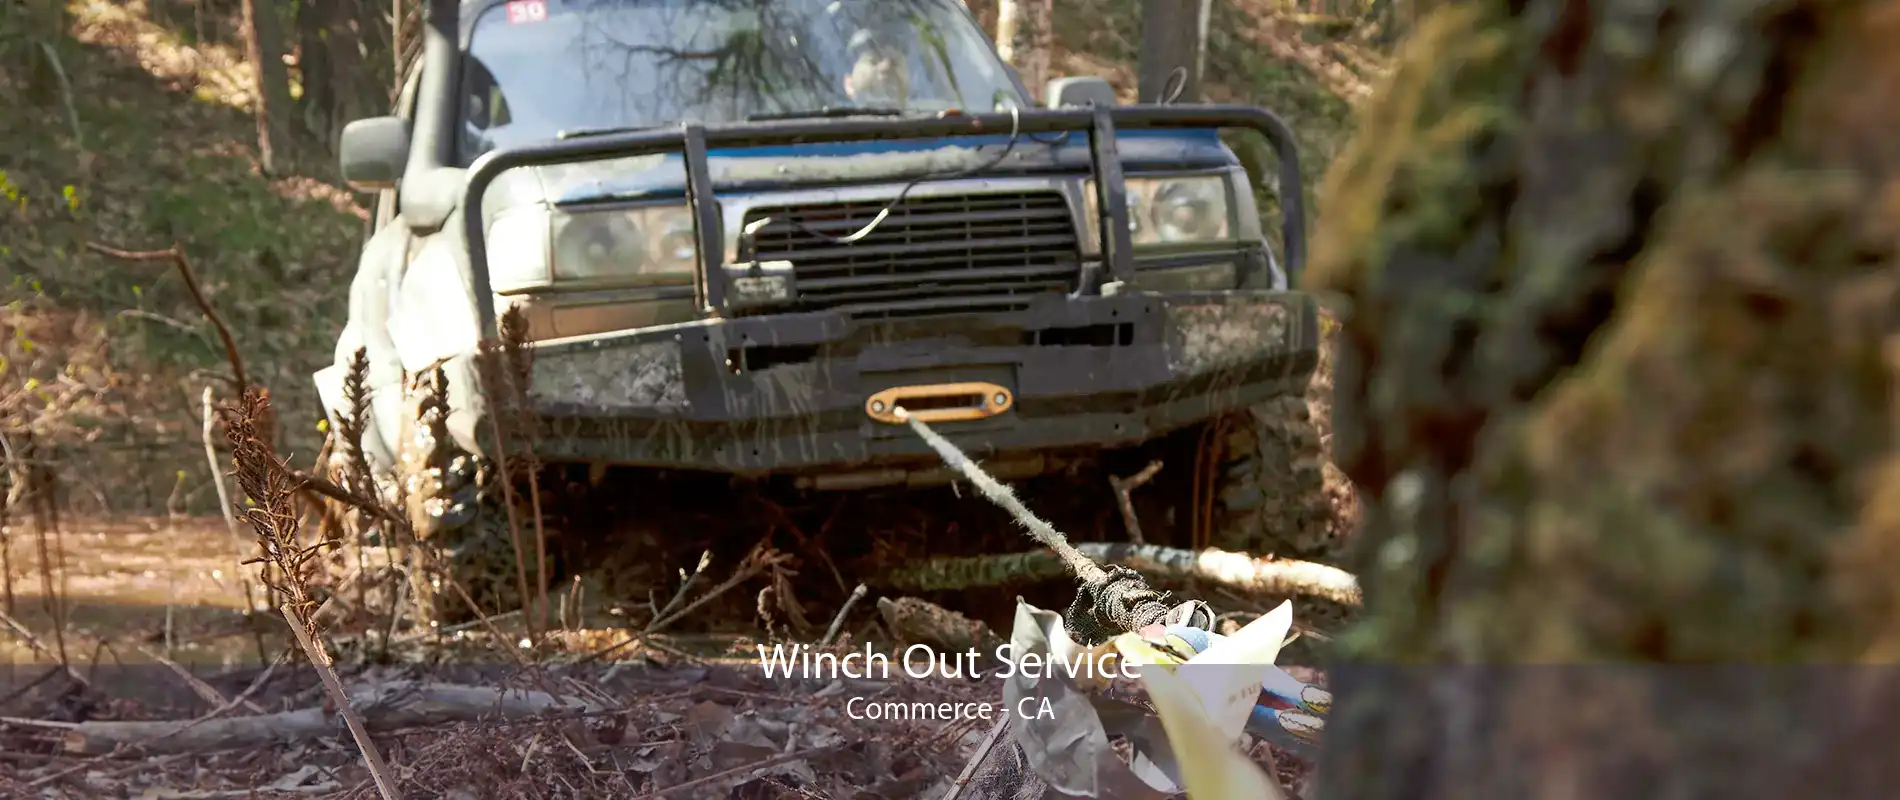 Winch Out Service Commerce - CA